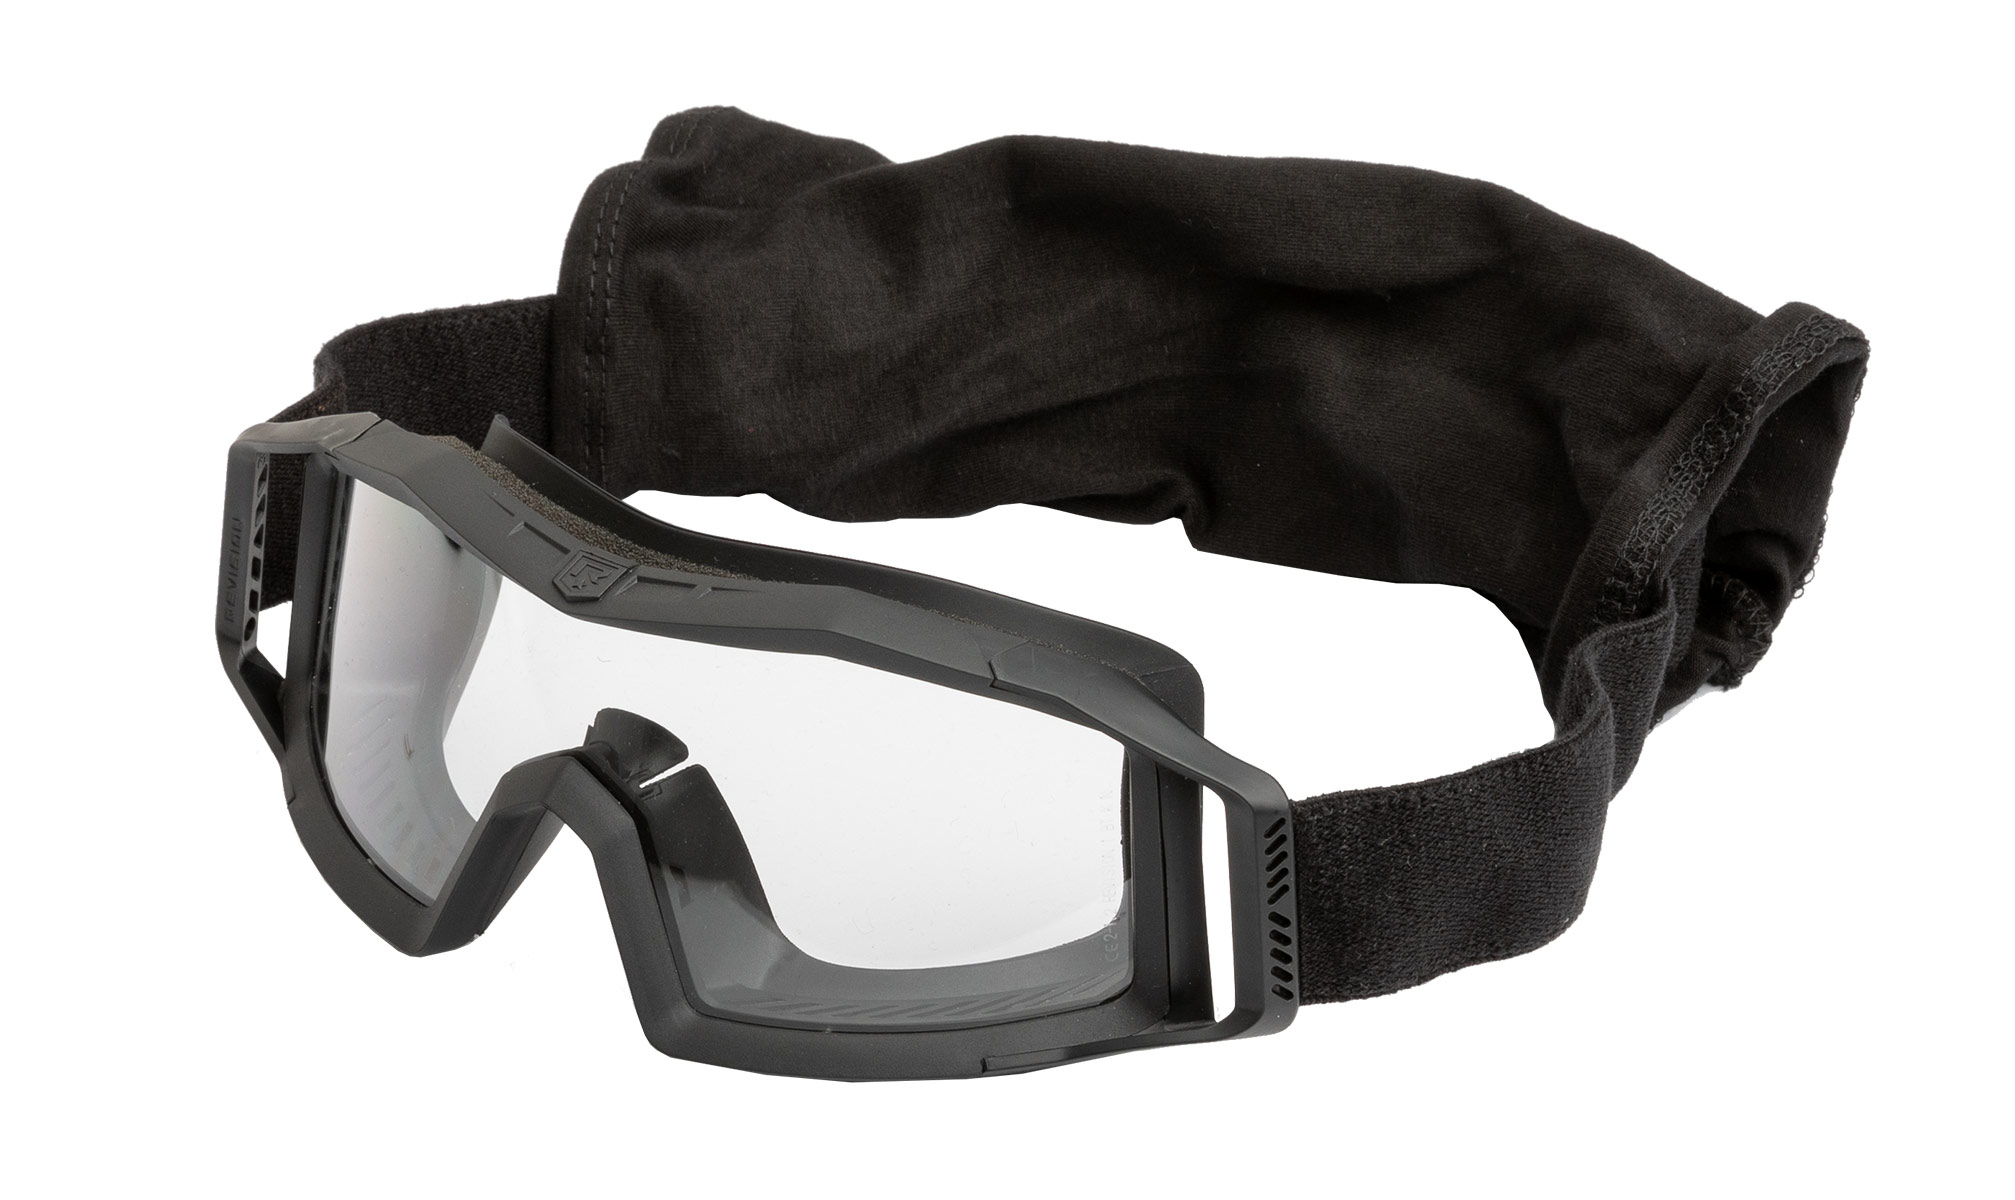 Revision Wolfspider Ballistic Goggles, Deluxe Kit - Varusteleka.com